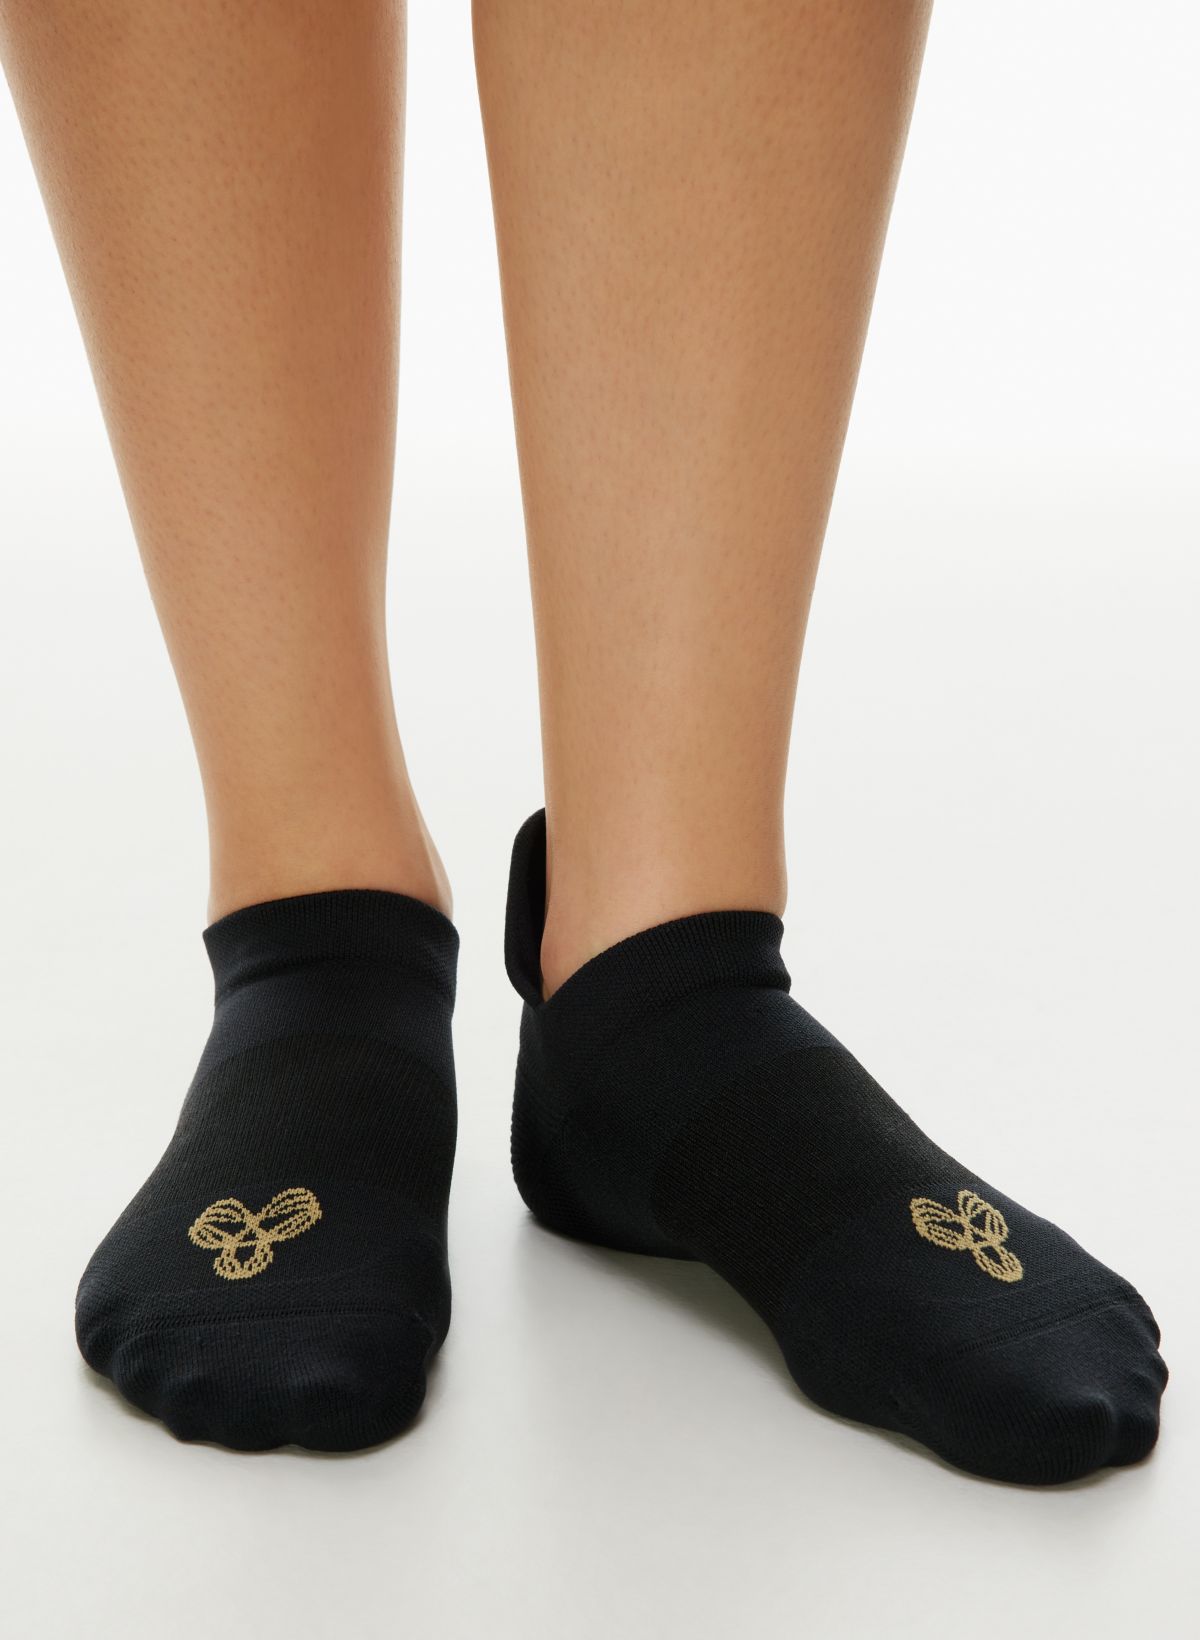 kate spade new york No-Show Socks One Size Socks for Women for sale